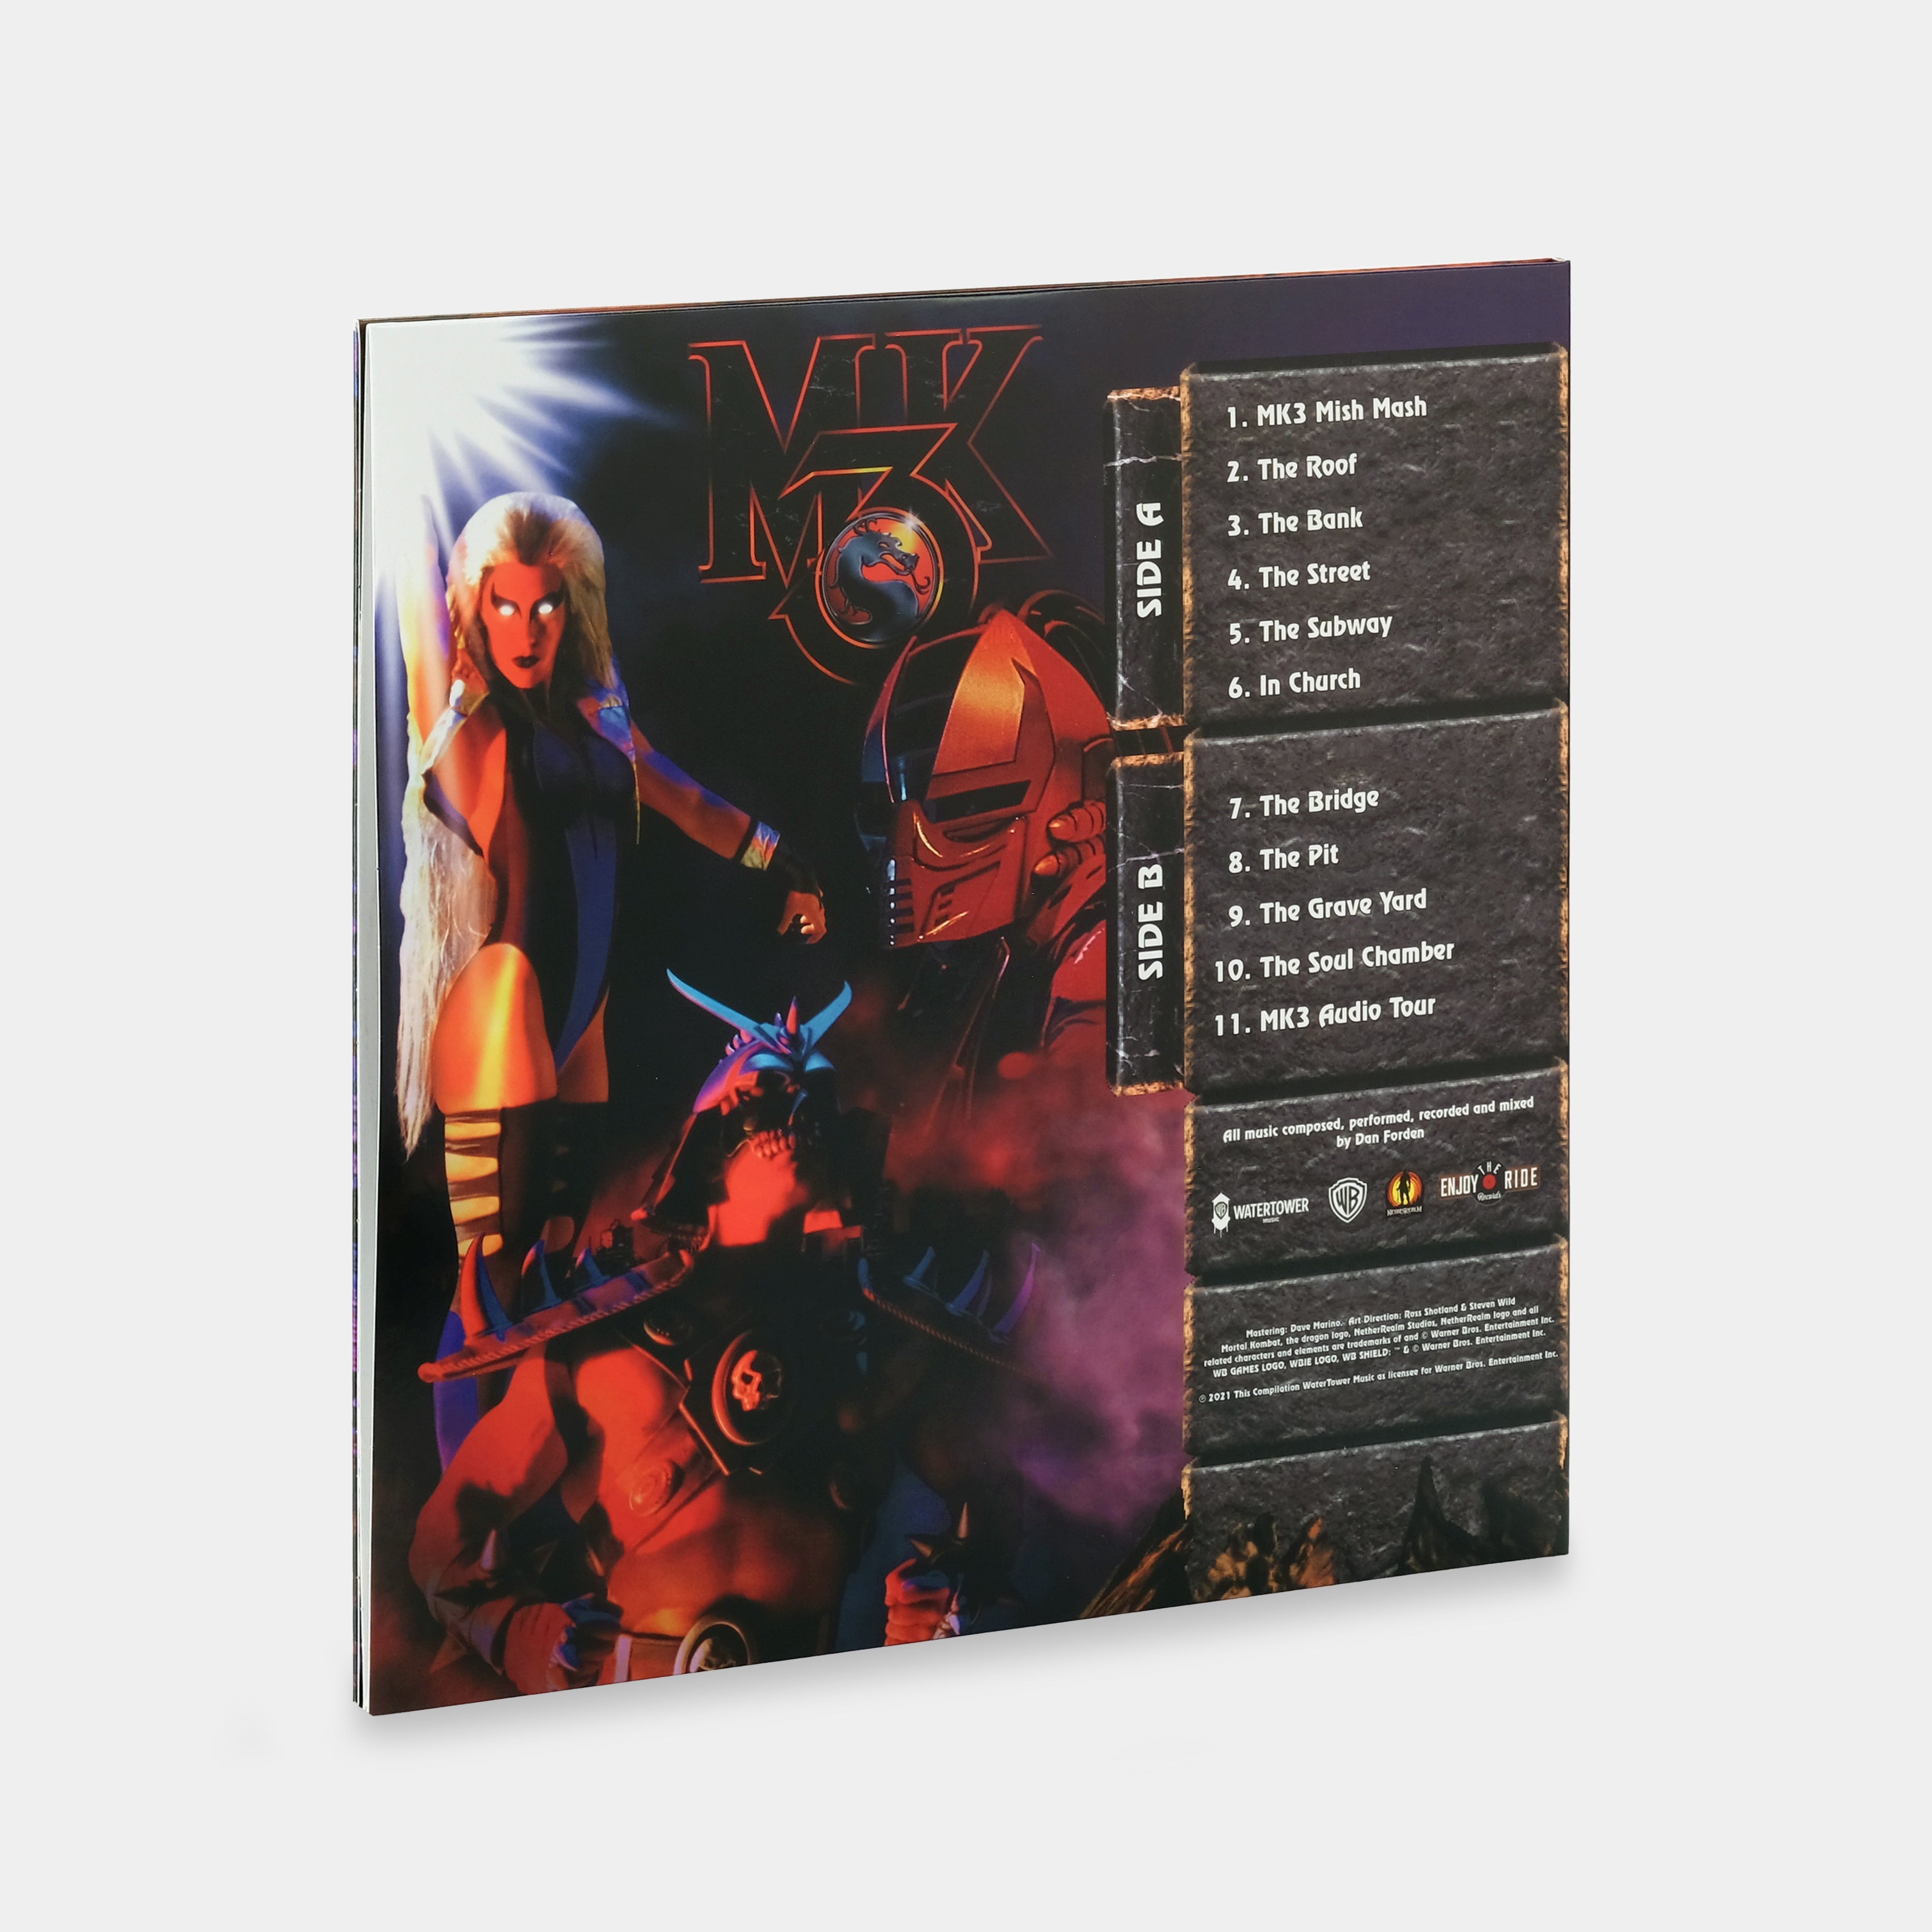 Mortal Kombat 4 (Soundtrack from the Arcade Game) [2021 Remaster